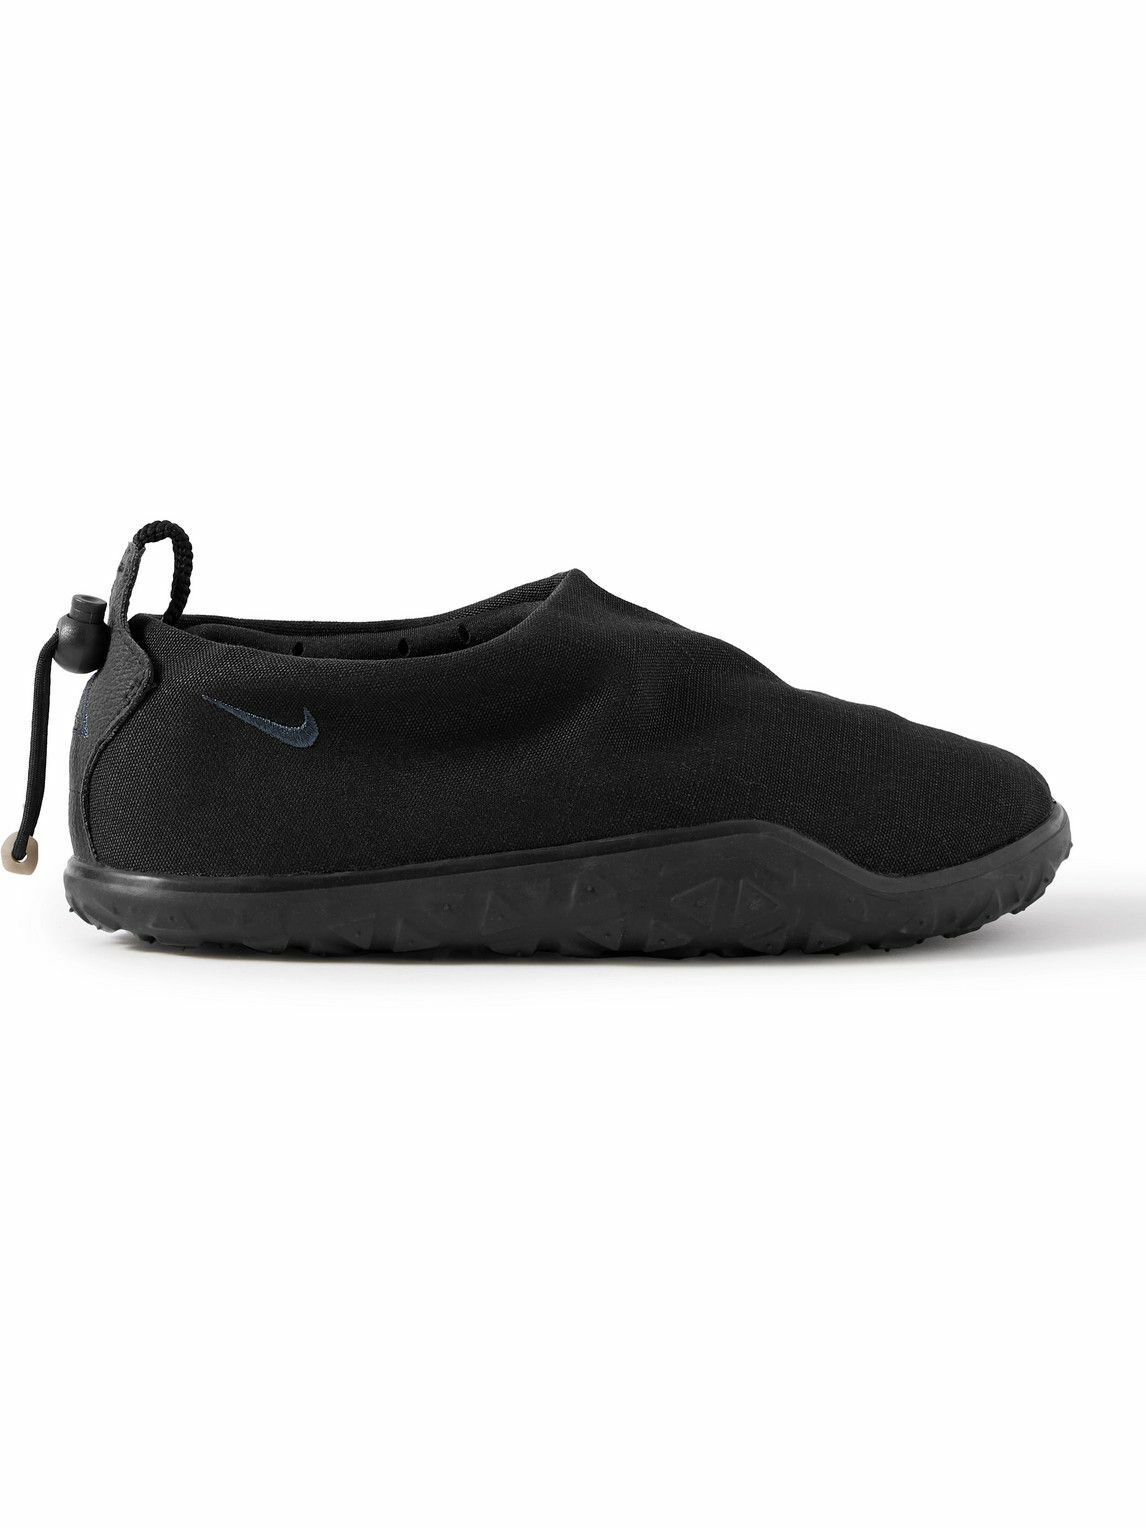 Nike - ACG Moc Leather-Trimmed Canvas Sneakers - Black Nike